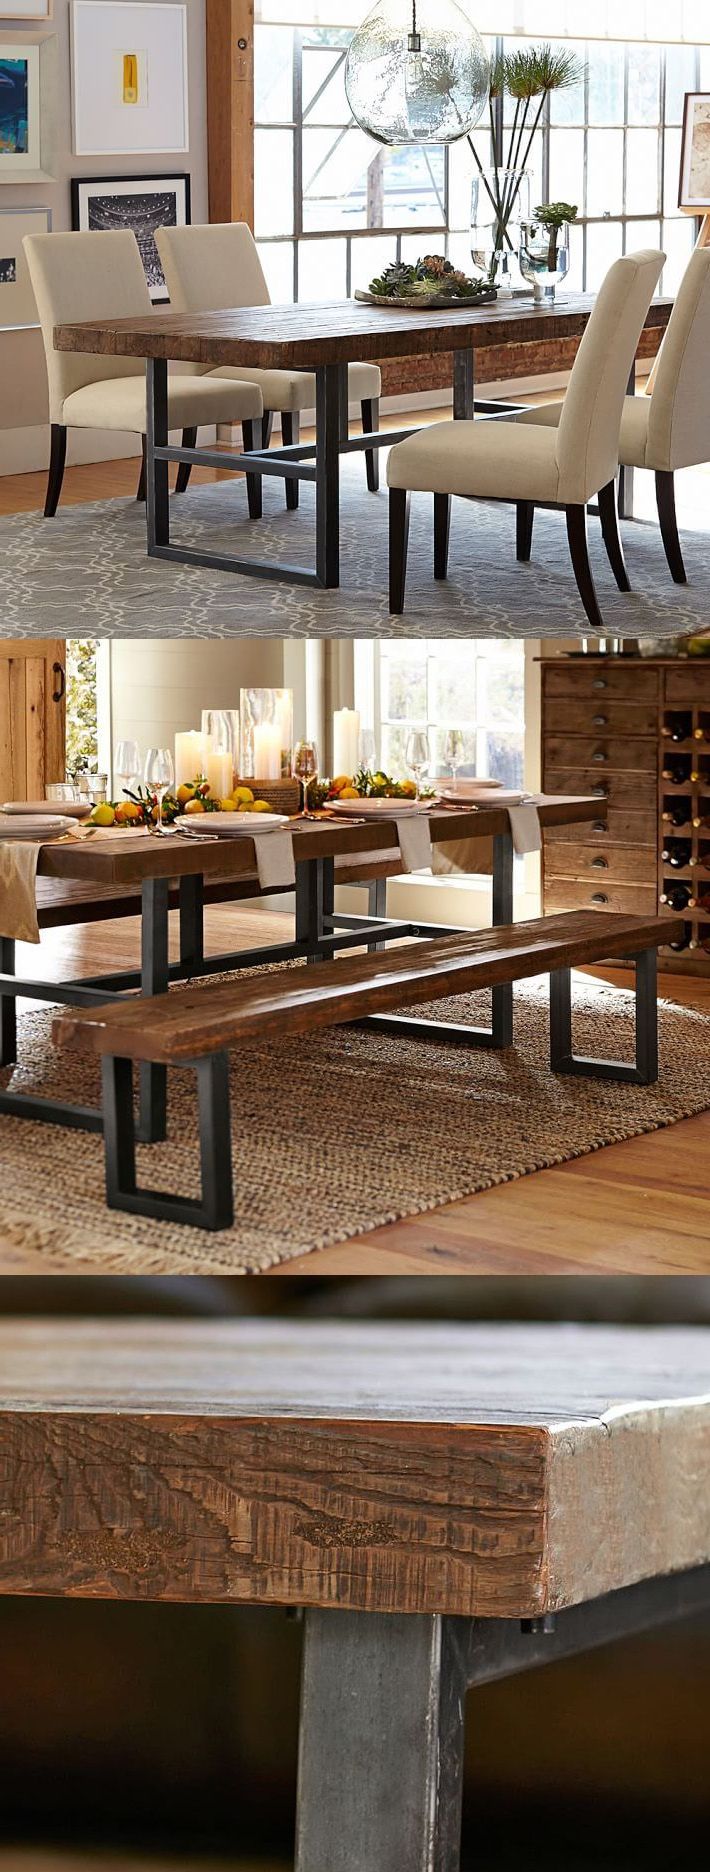 Most Recent Griffin Reclaimed Wood & Wrought Iron Rectangular Fixed With Regard To Griffin Reclaimed Wood Dining Tables (View 4 of 25)